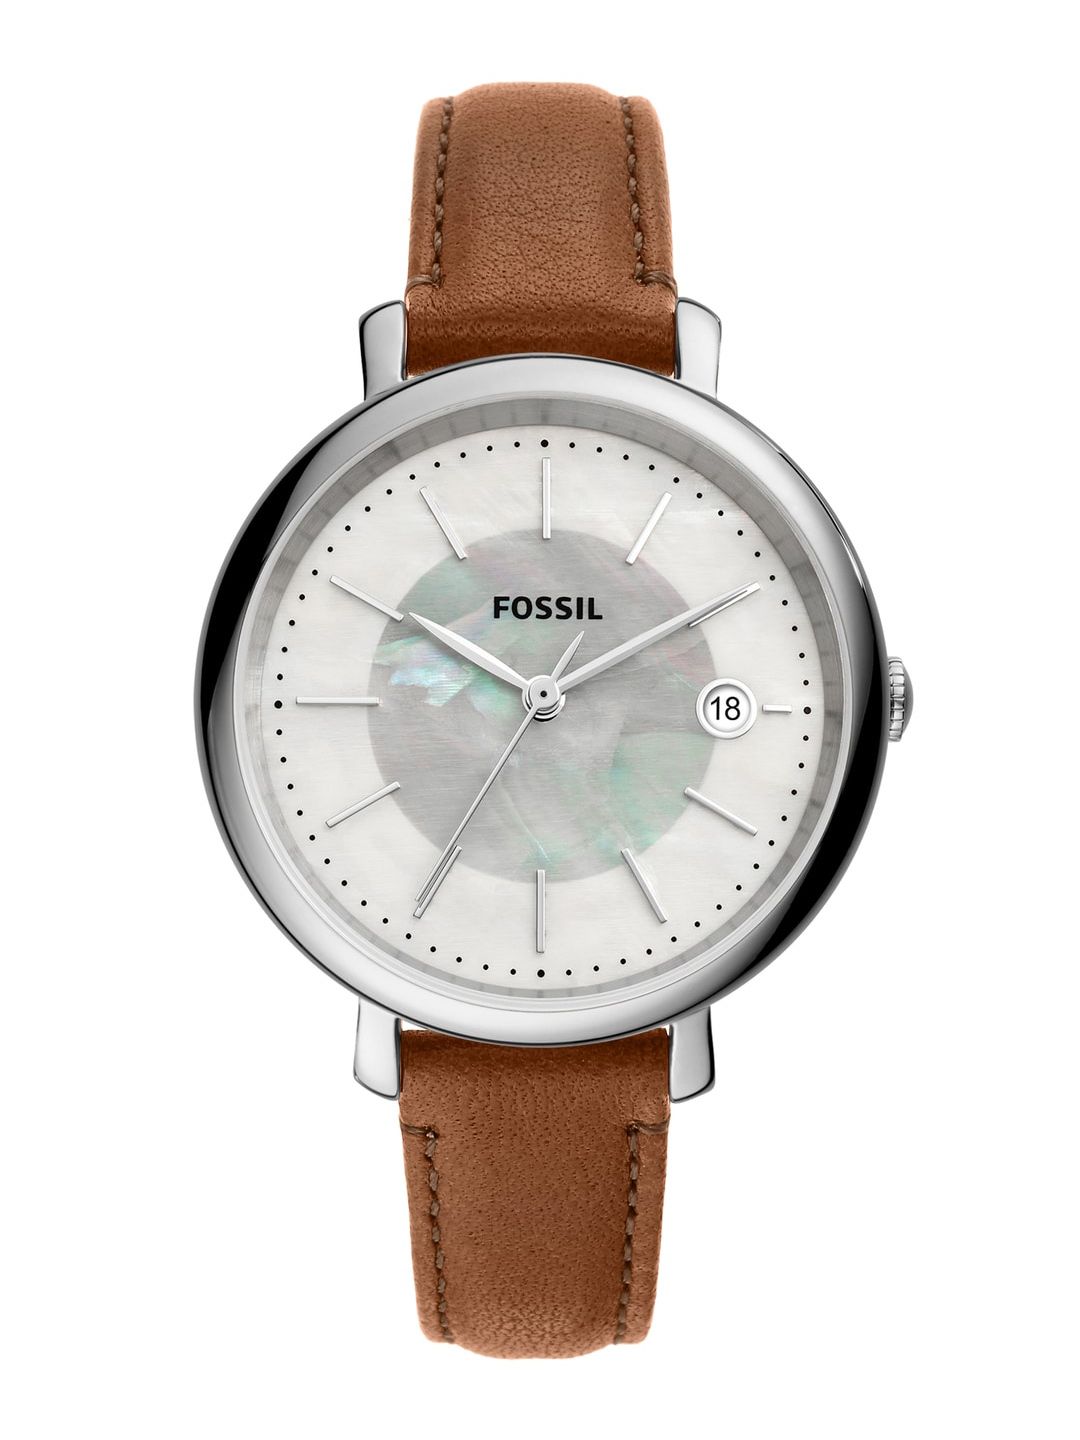 Fossil Women Silver-Toned Printed Dial & Brown Leather Straps Analogue Watch Price in India